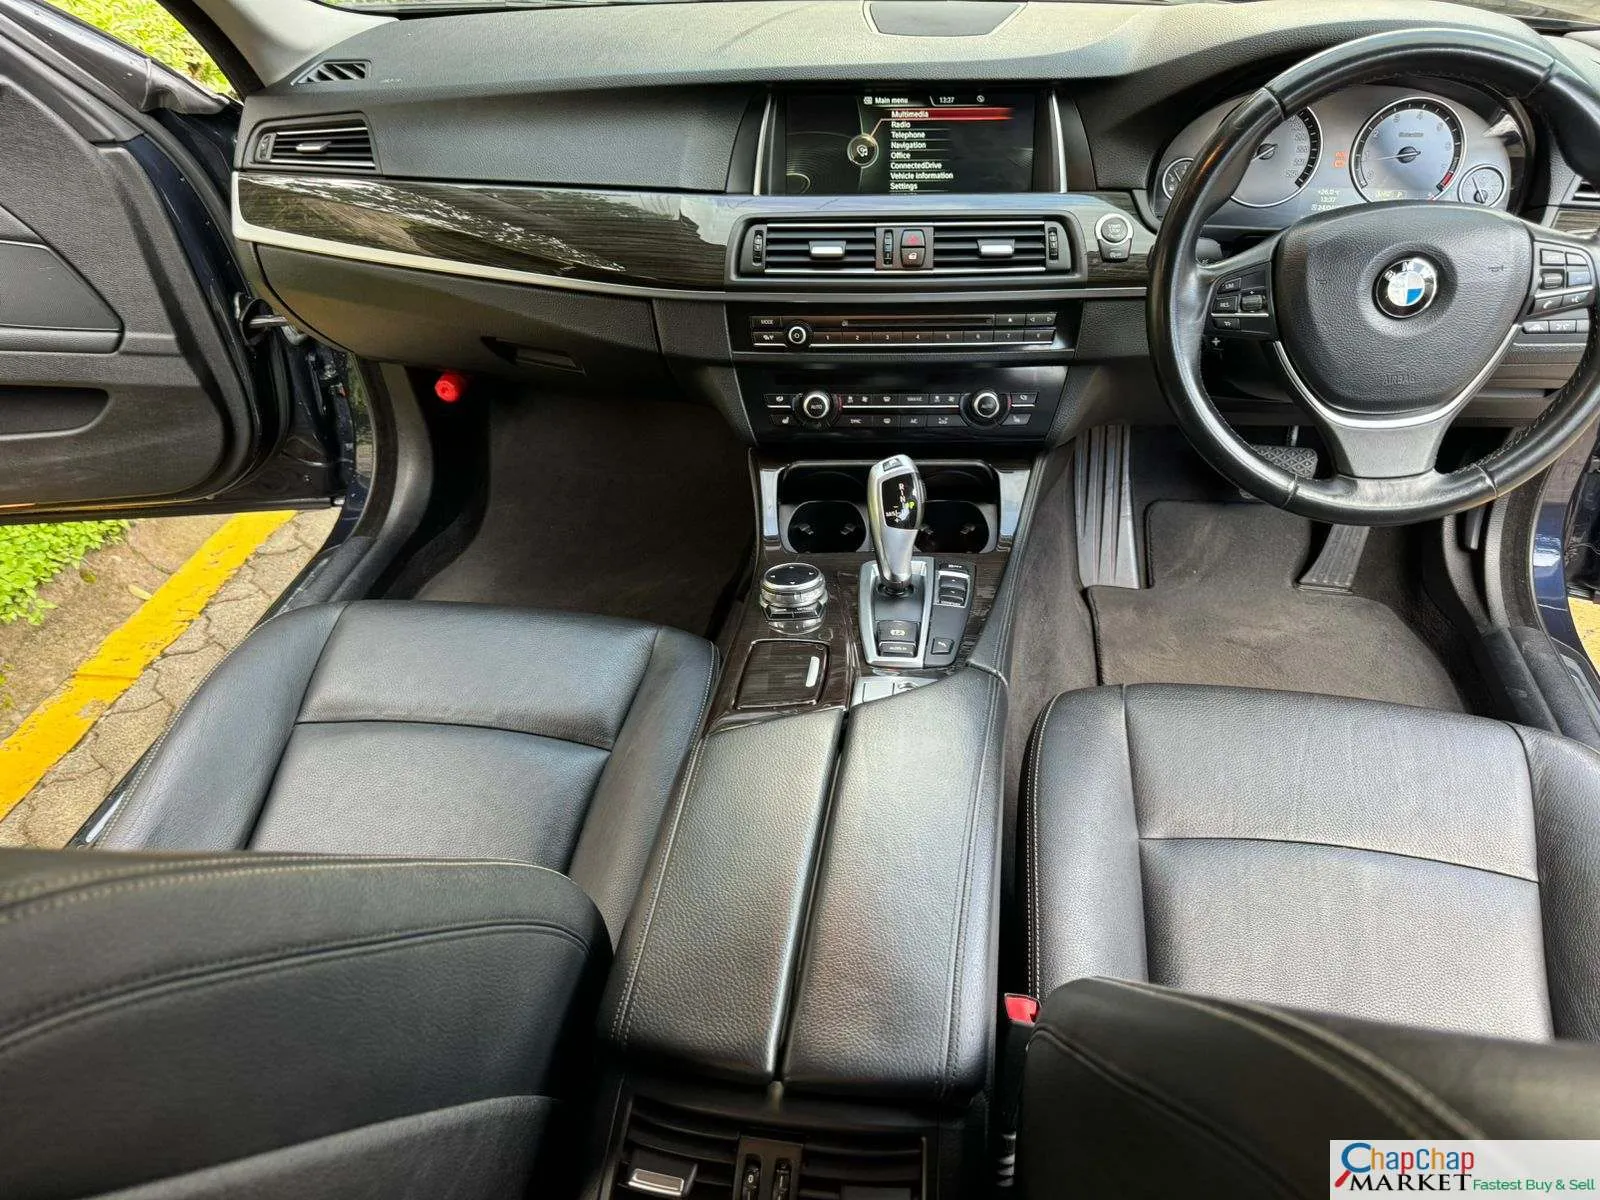 Bmw 523i You Pay 30% deposit hire purchase INSTALLMENTS Trade in Ok 5 series